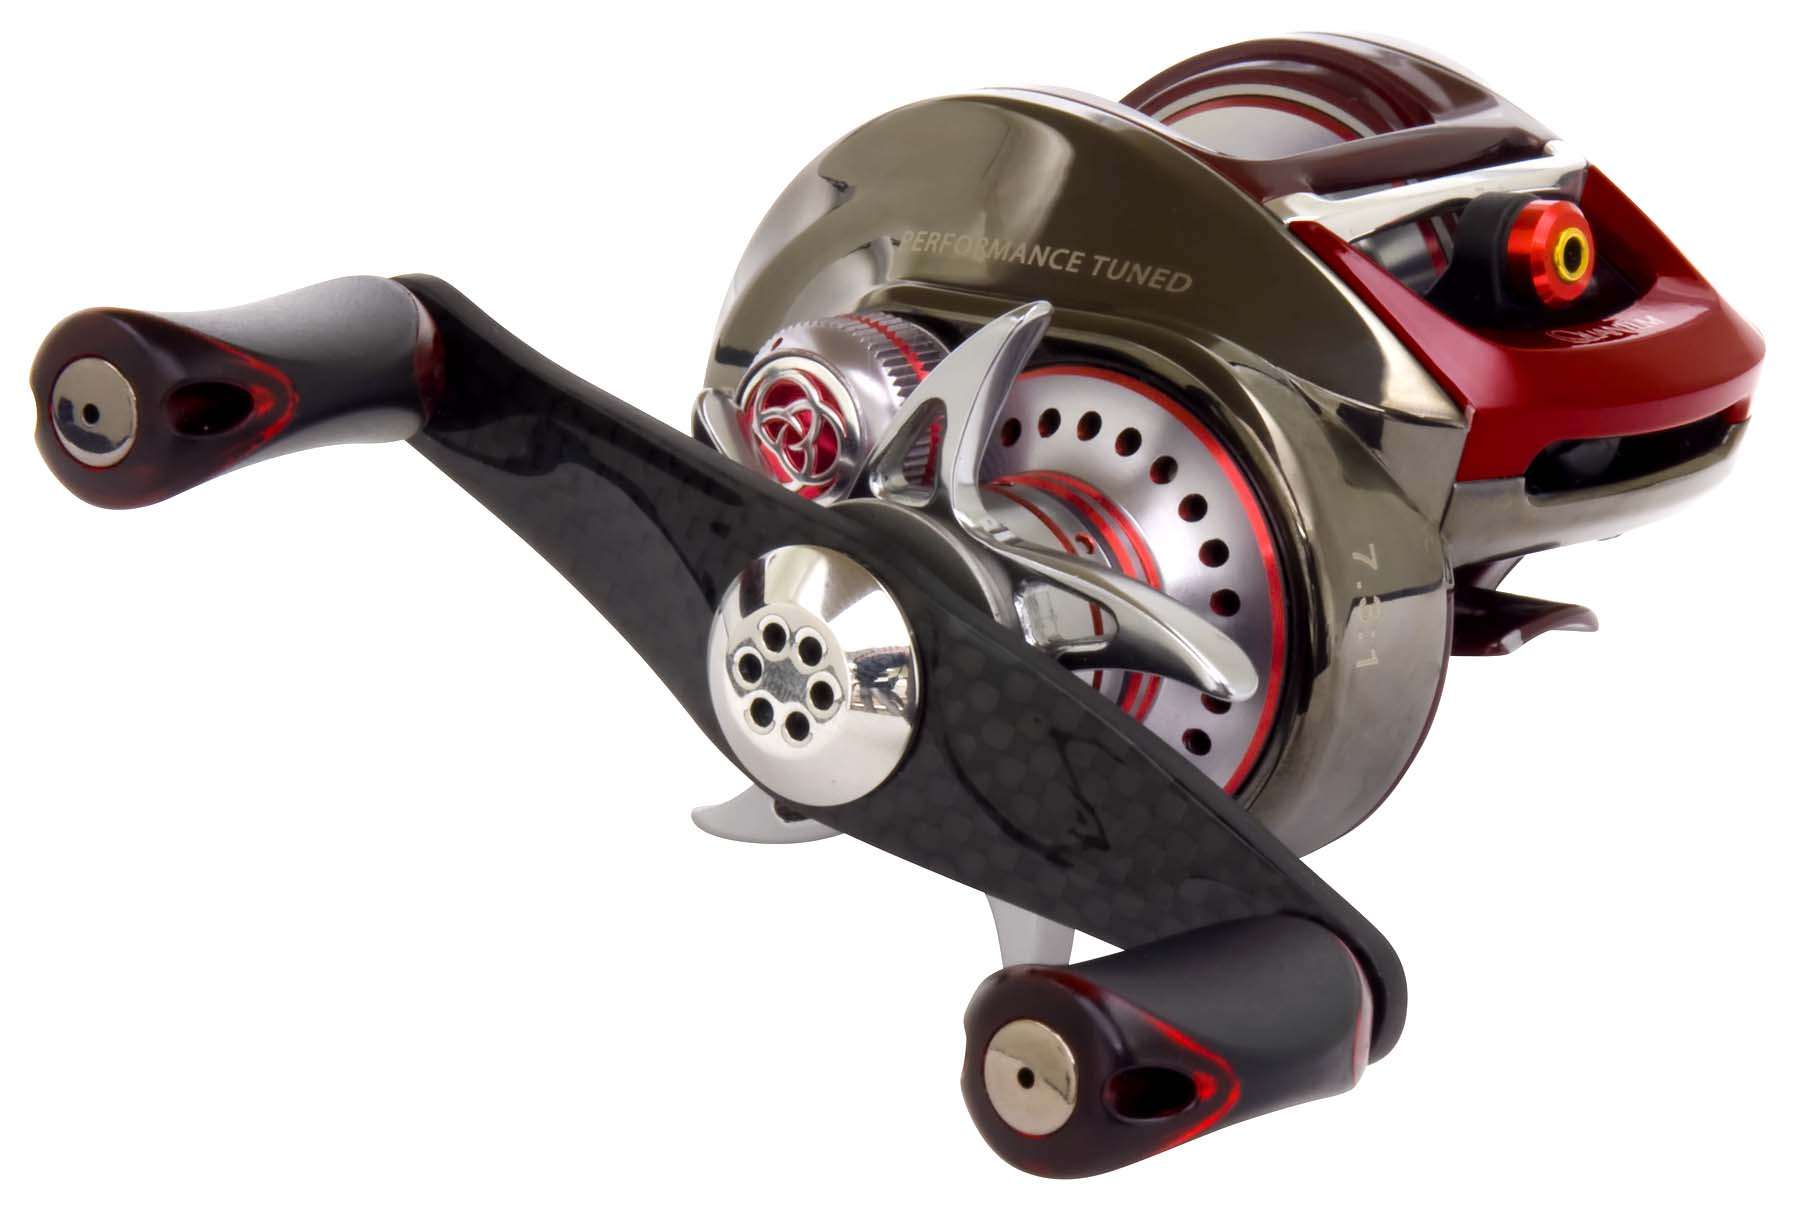 Quantum Tour KVD baitcast reel<br>The new Tour KVD reel features a blistering-fast 7.3:1 ratio, increased line capacity and 11 ball bearings. Perhaps the best thing about it is the self-adjusting cast control to cut down on overruns and keep you fishing.